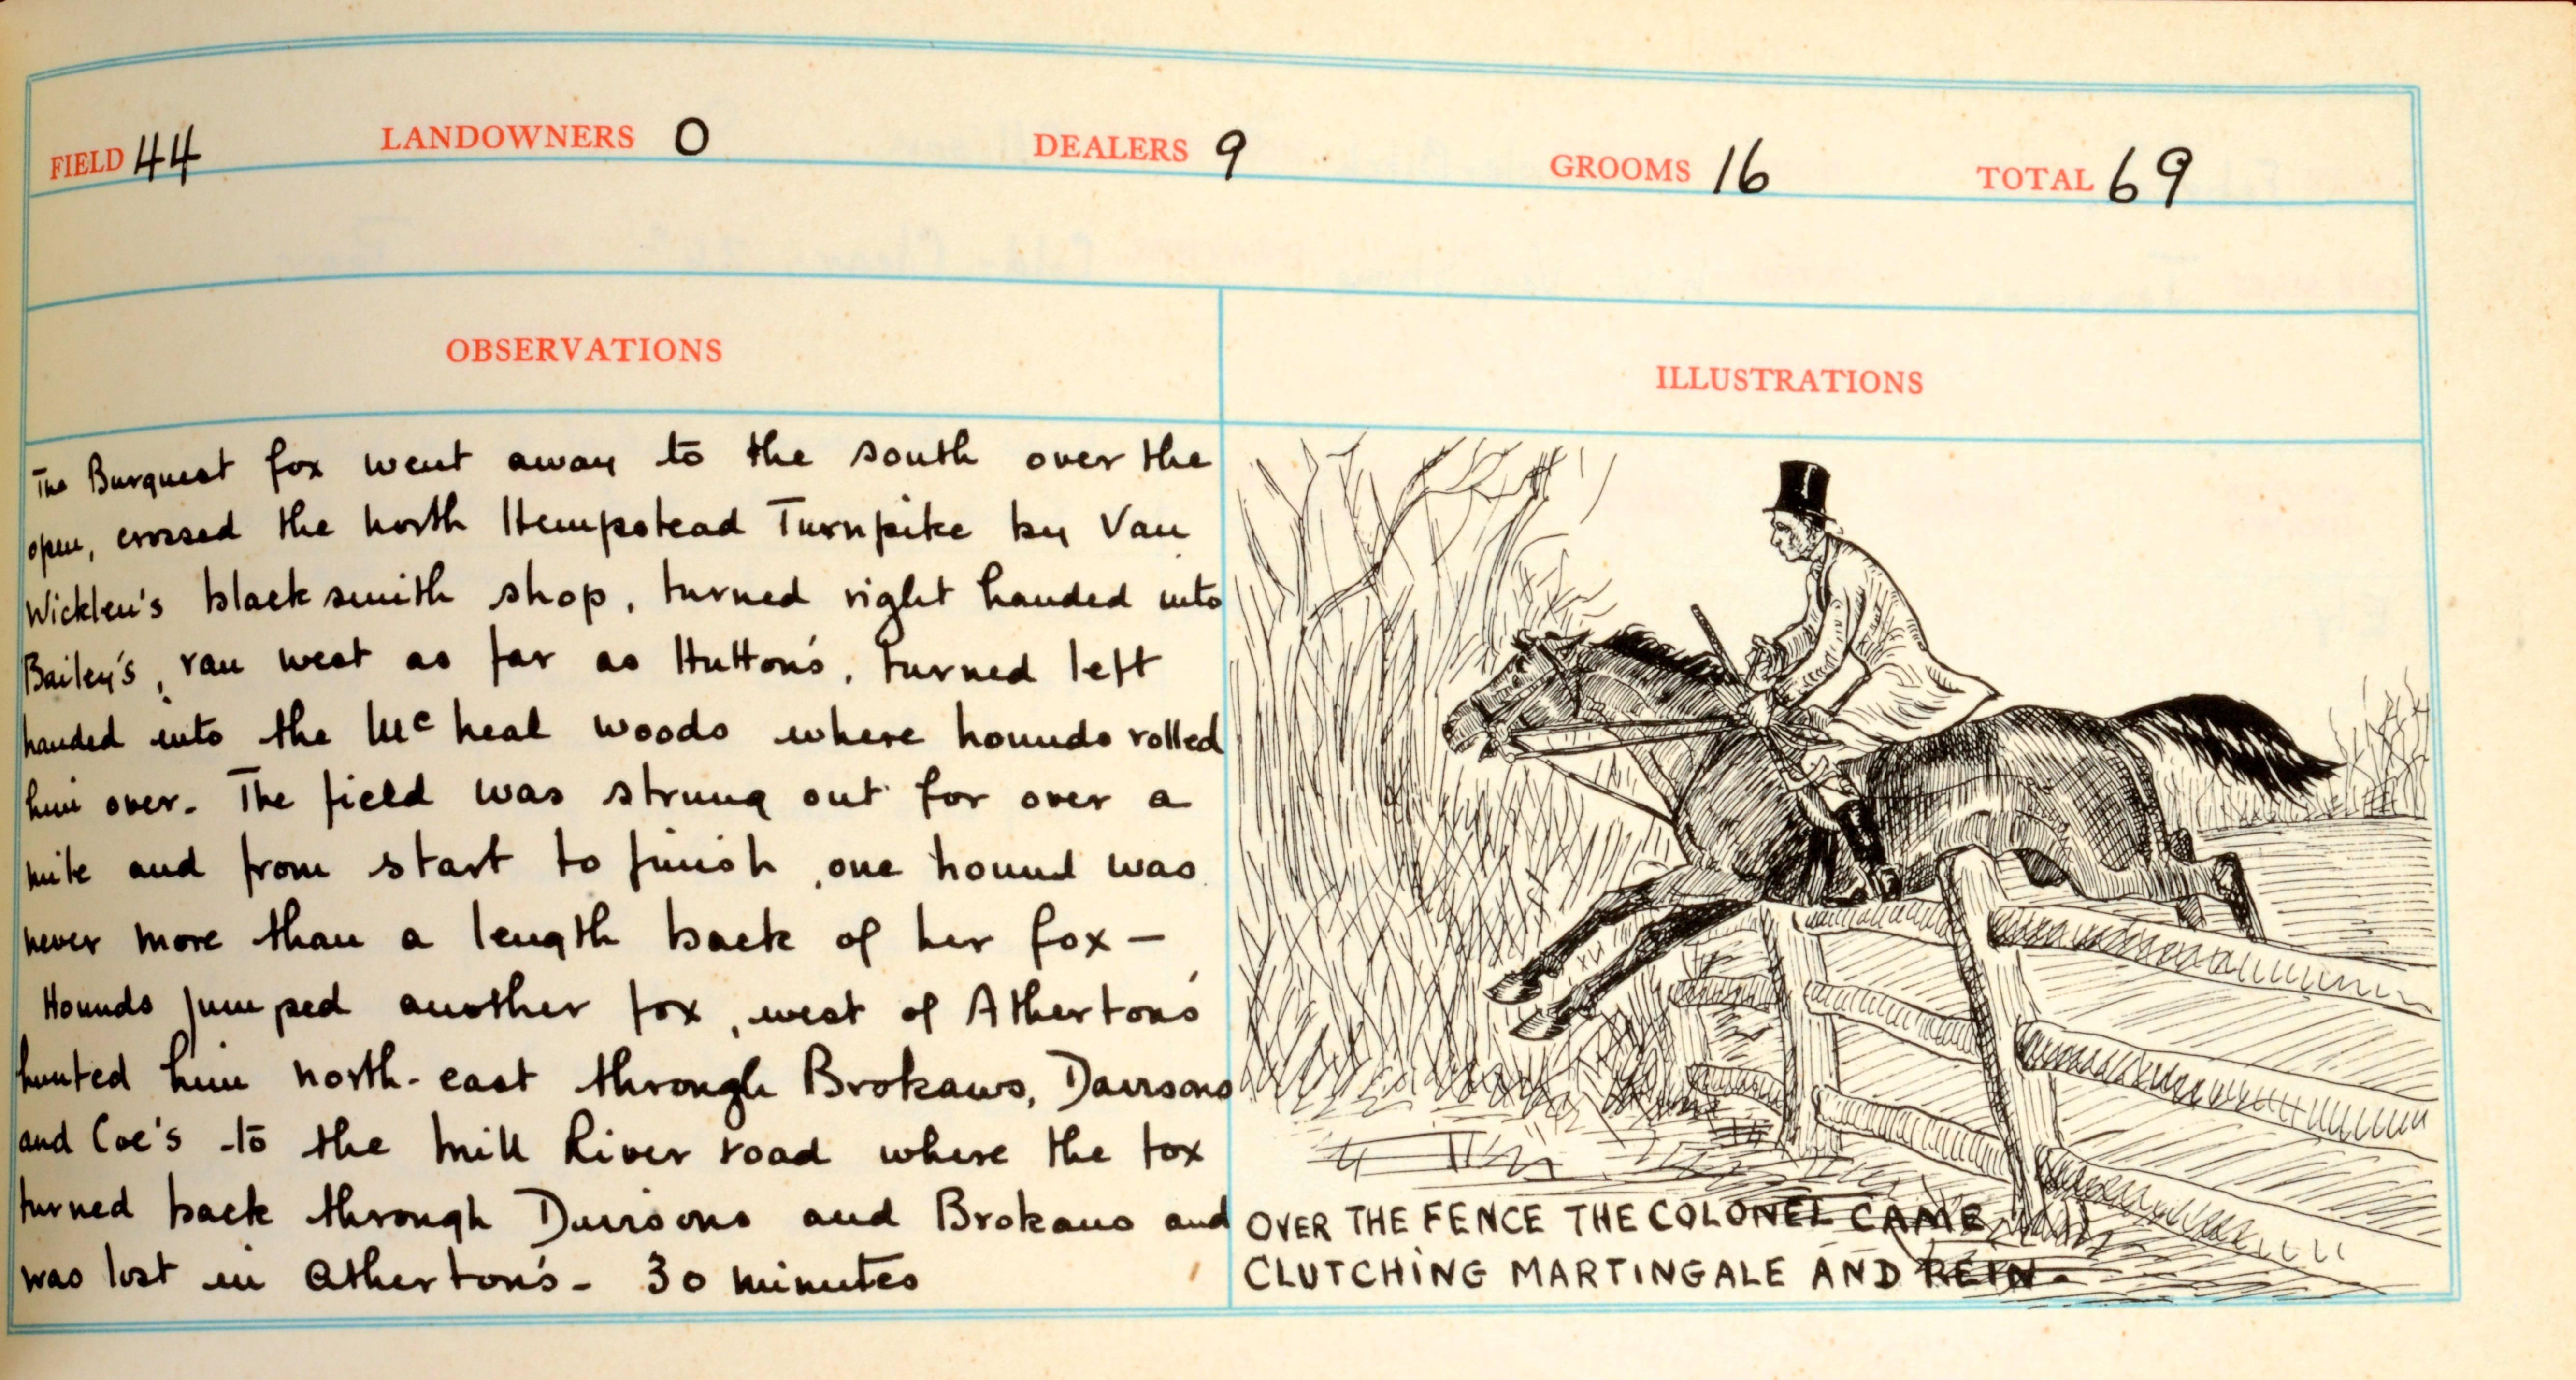 Paper Betty Babcock's Illustrated Hunting Diary